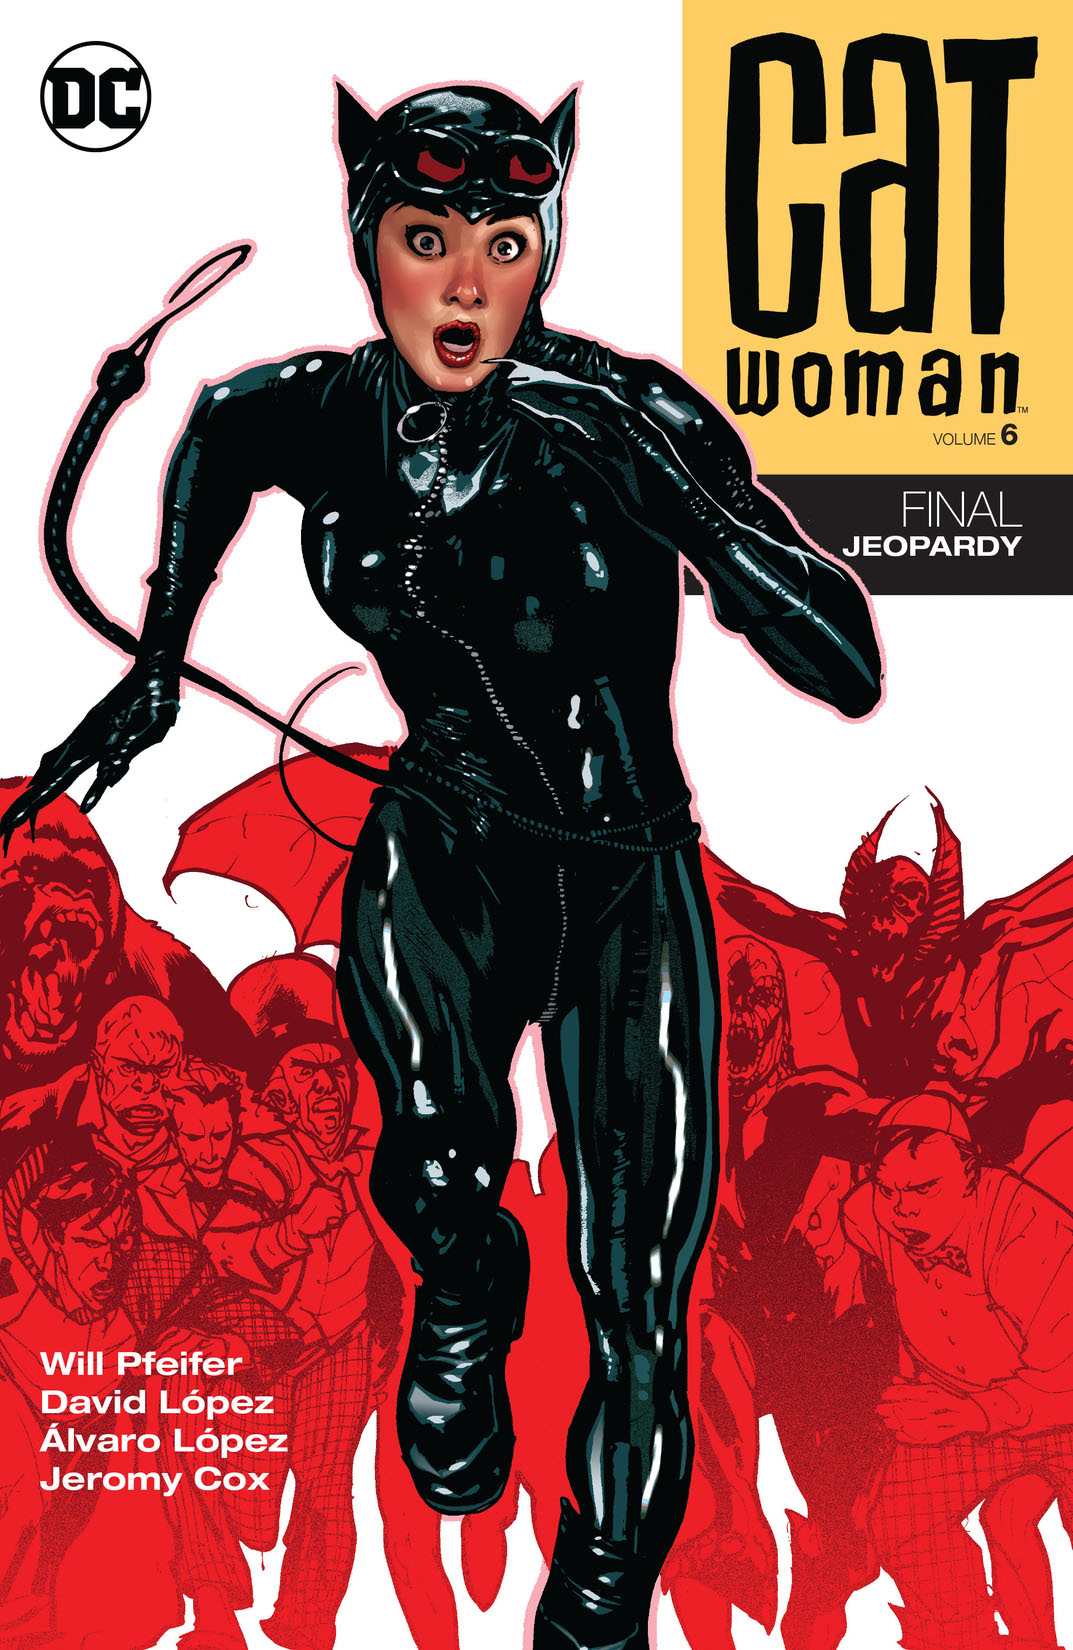 Catwoman Vol. 6: Final Jeopardy preview images